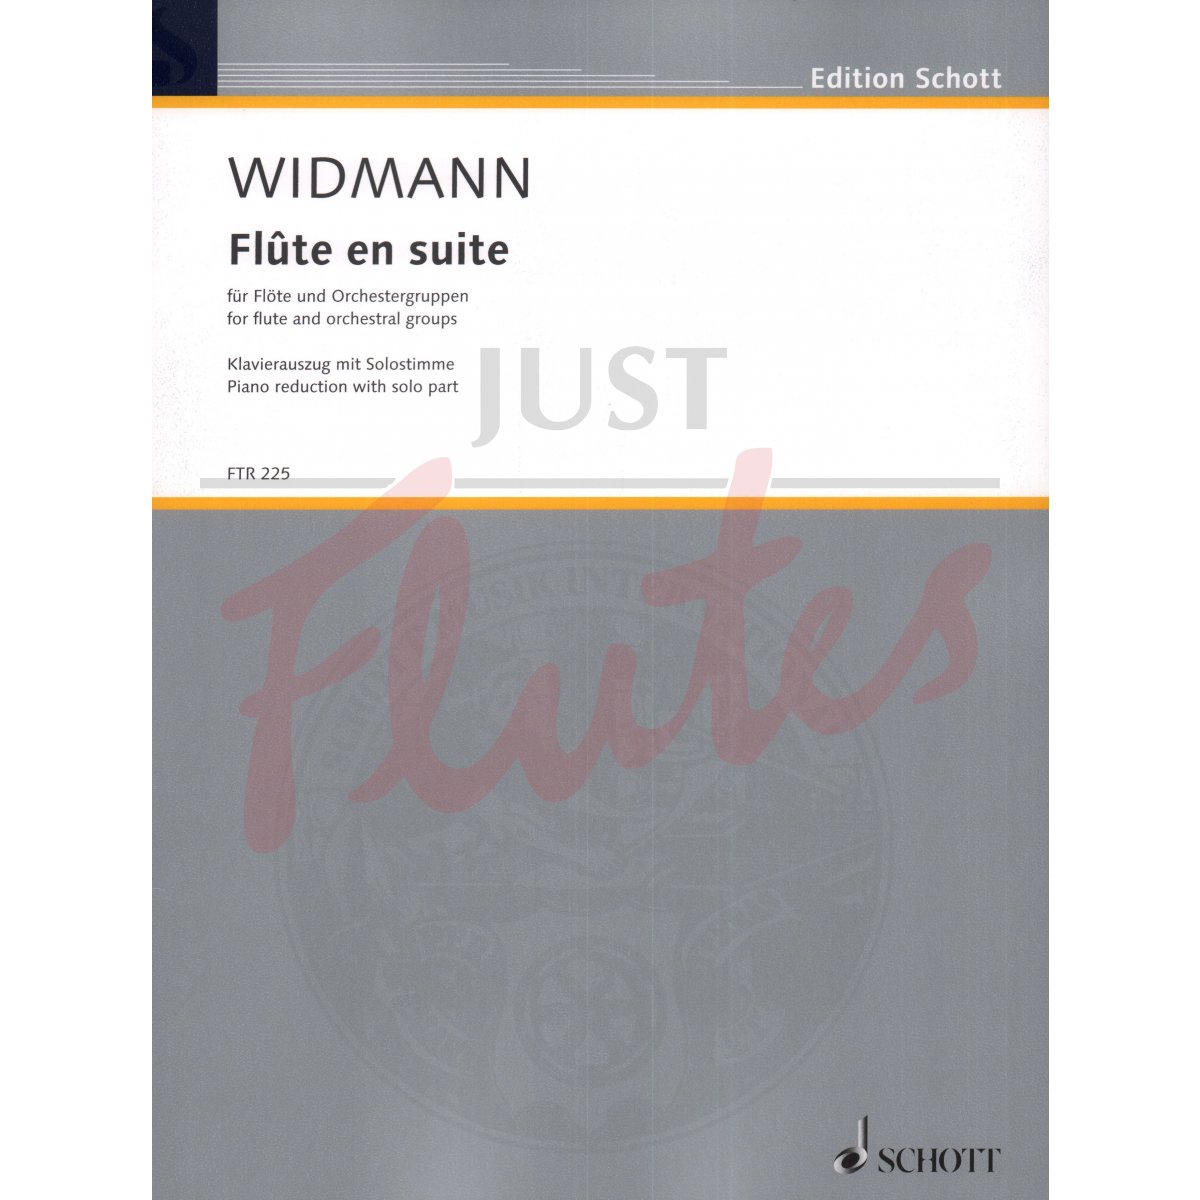 Flute en suite for Flute and Orchestral Groups arranged for Flute and Piano